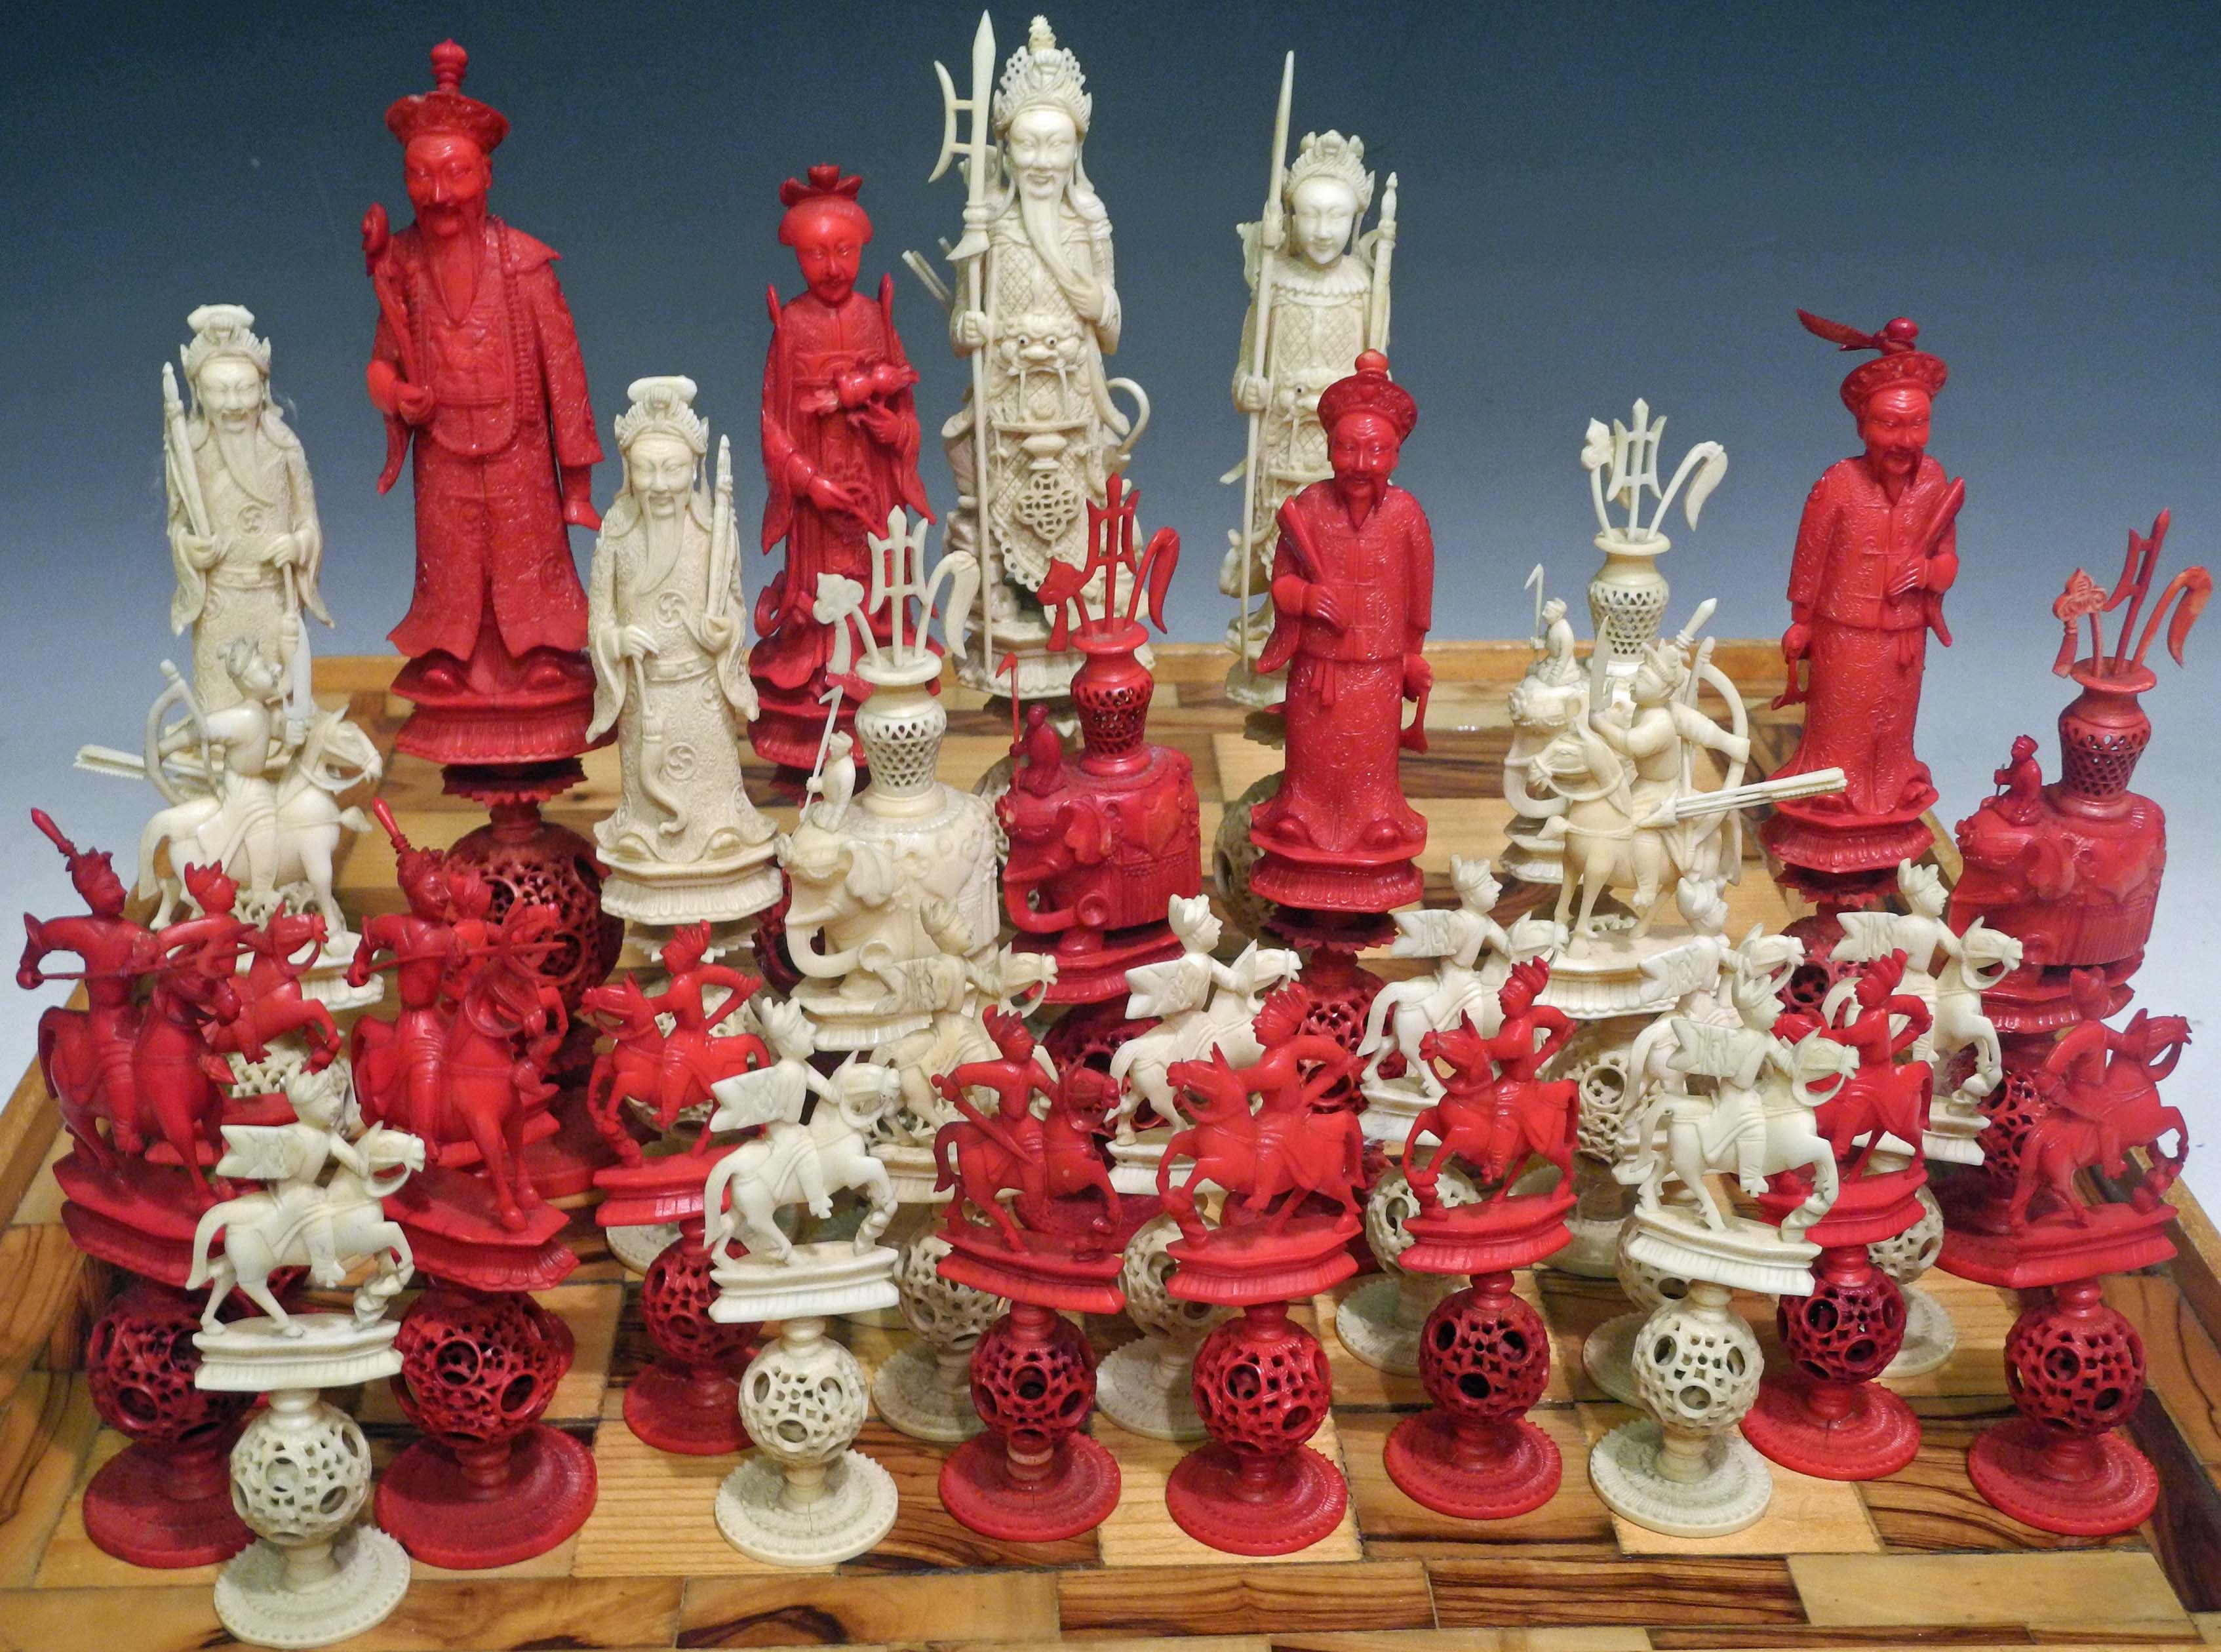 A fine 19th Century Chinese carved ivory chess set, the chess pieces are carved to represent a